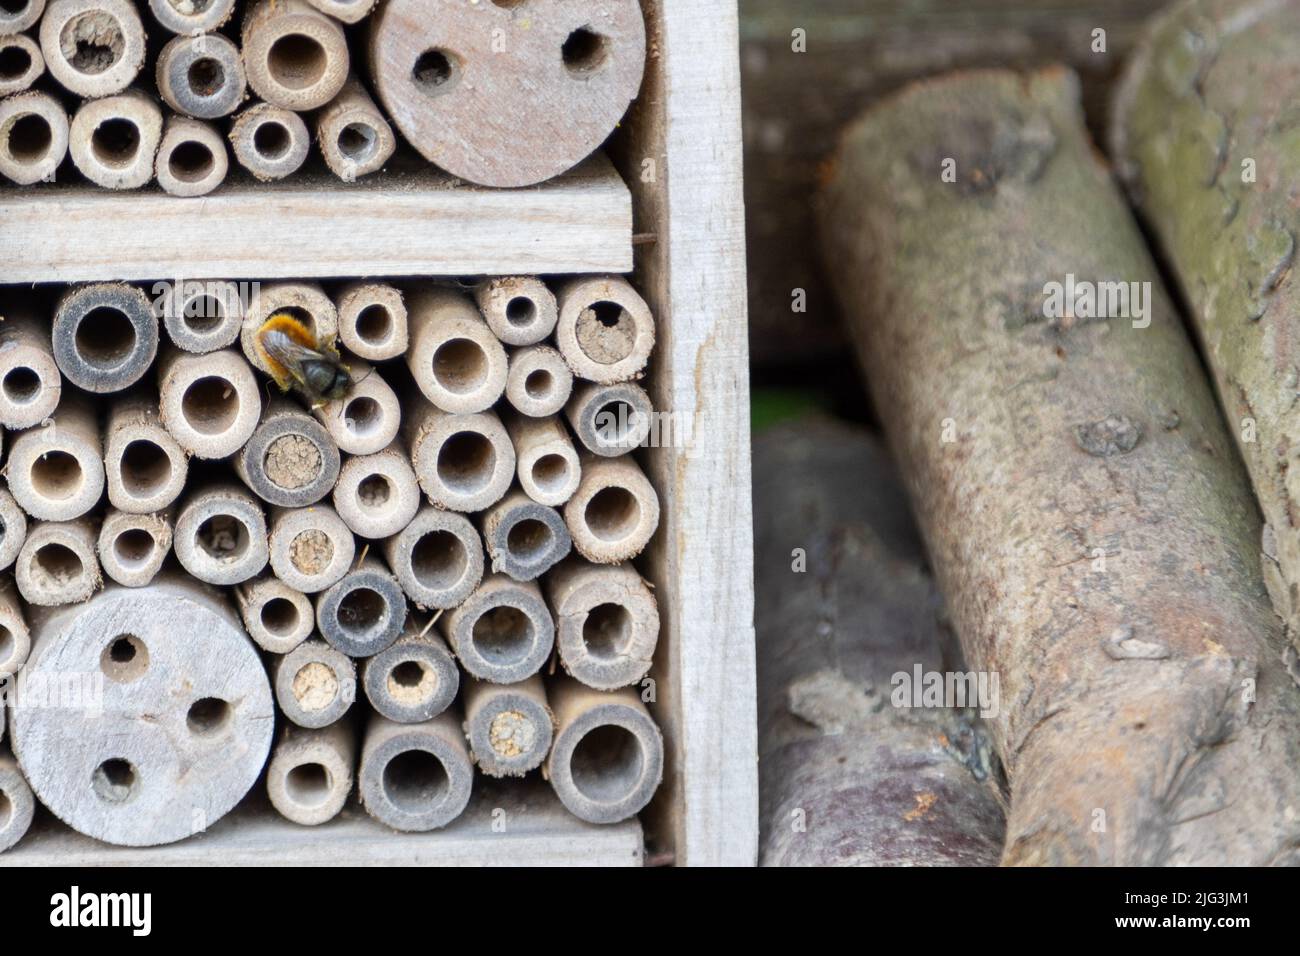 An insect hotel for bees, wasps and other insects made of old wood. Stock Photo